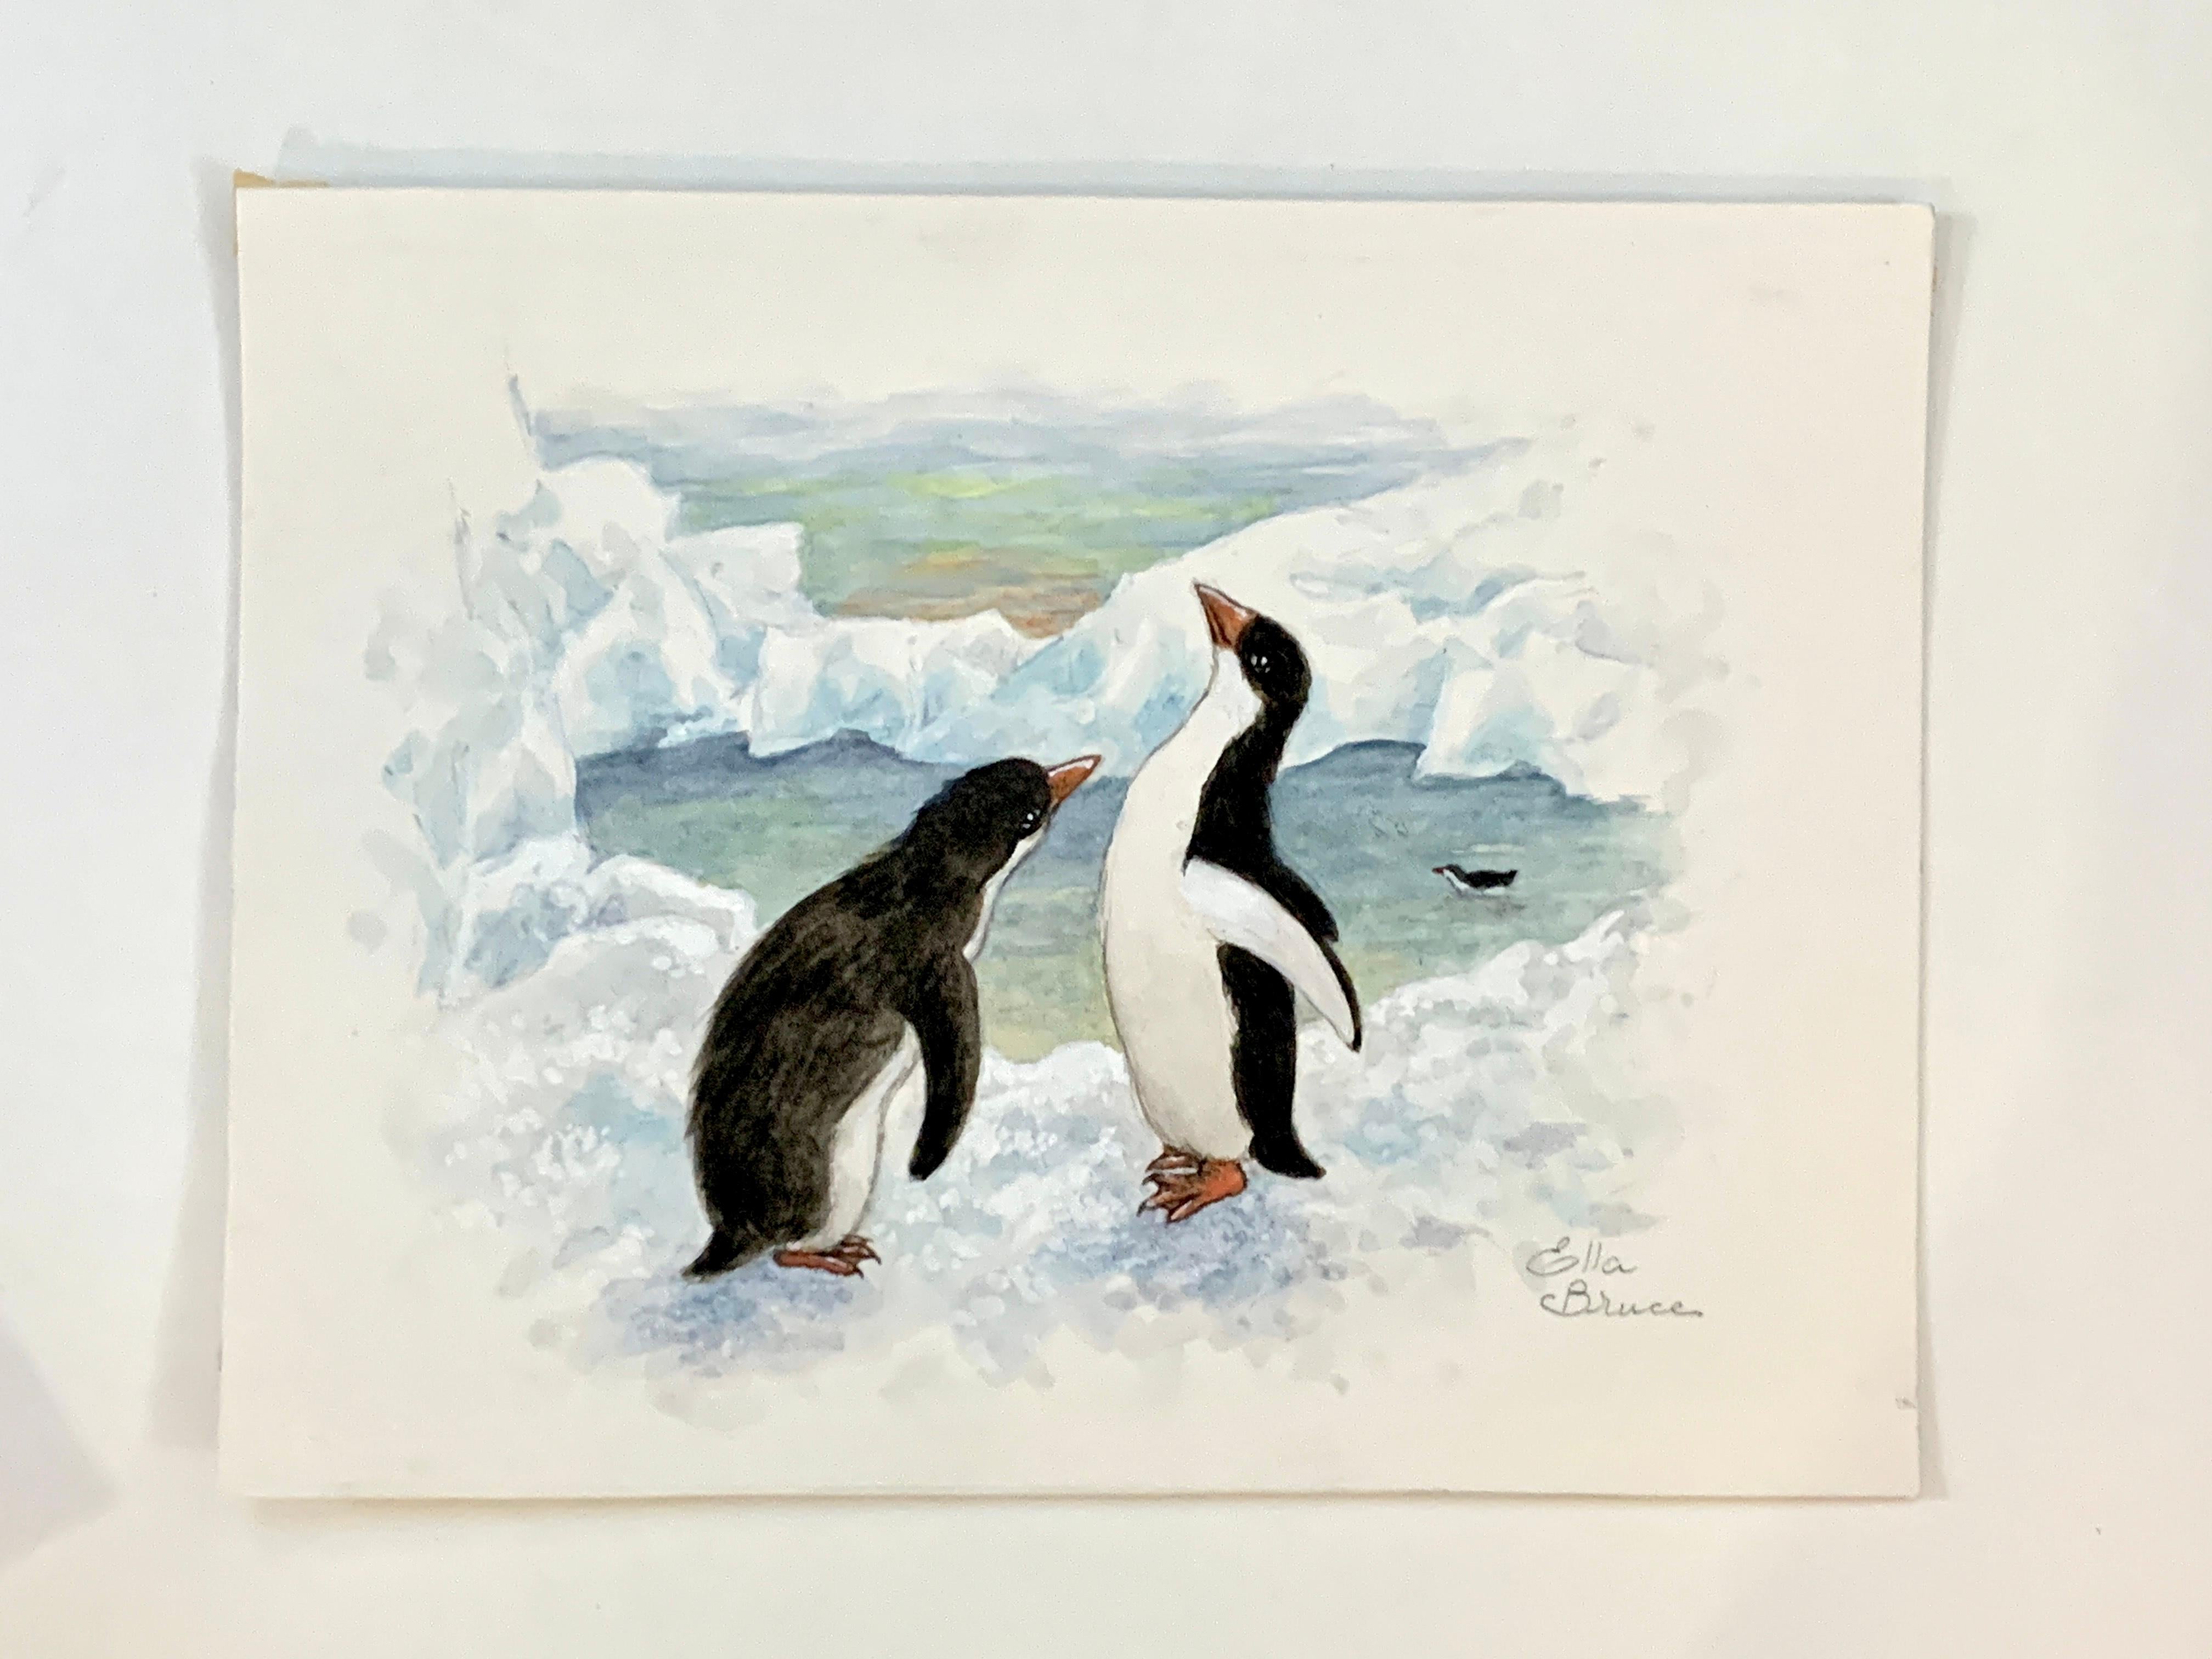 Ella Bruce Figurative Art - Christmas Winter English watercolor of two Penguins in the Antarctic 